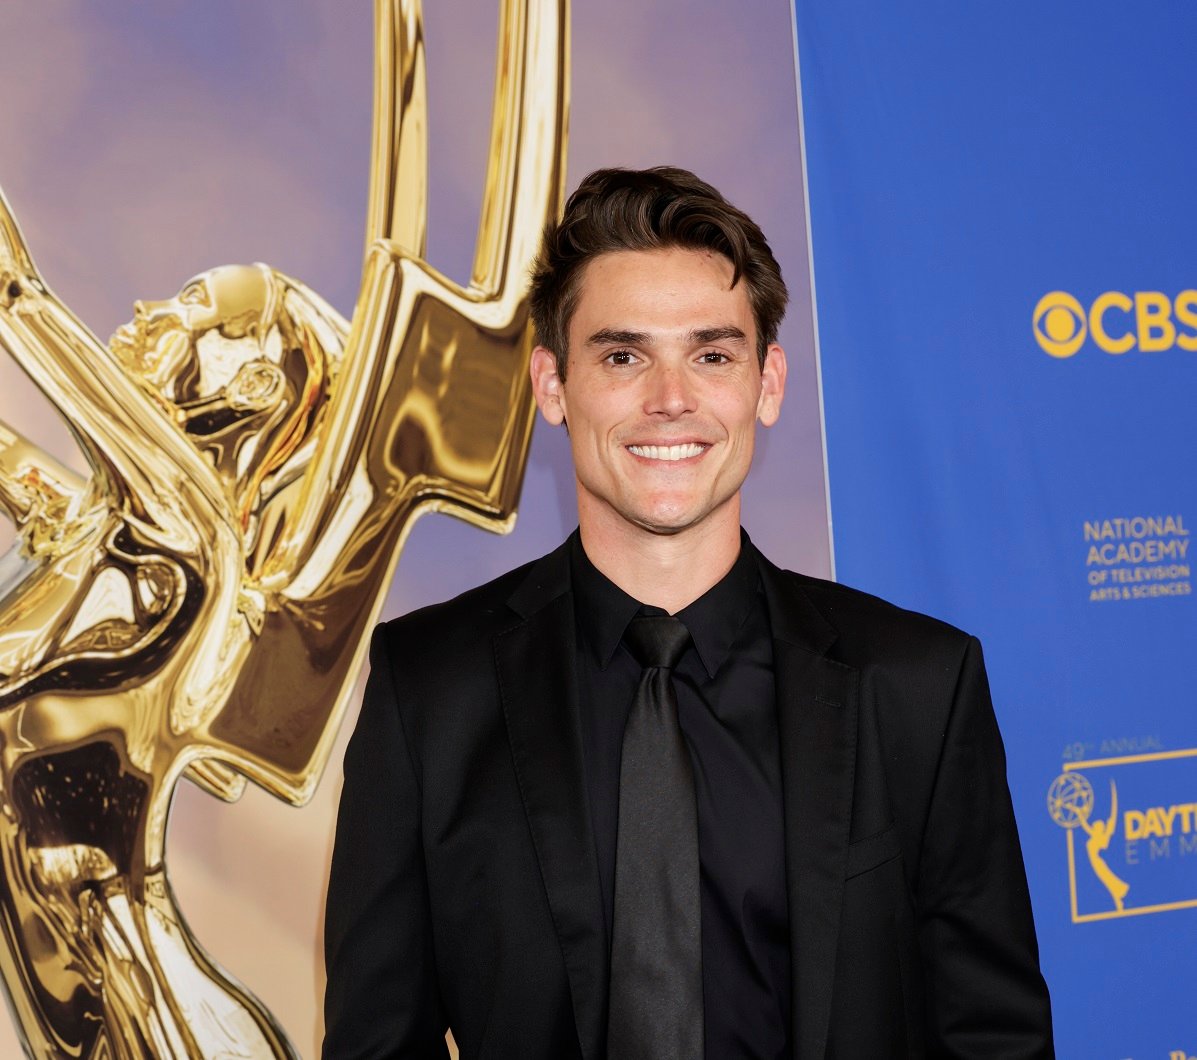 'The Young and the Restless' star Mark Grossman wearing a black suit and smiling during the 2022 Daytime Emmys.